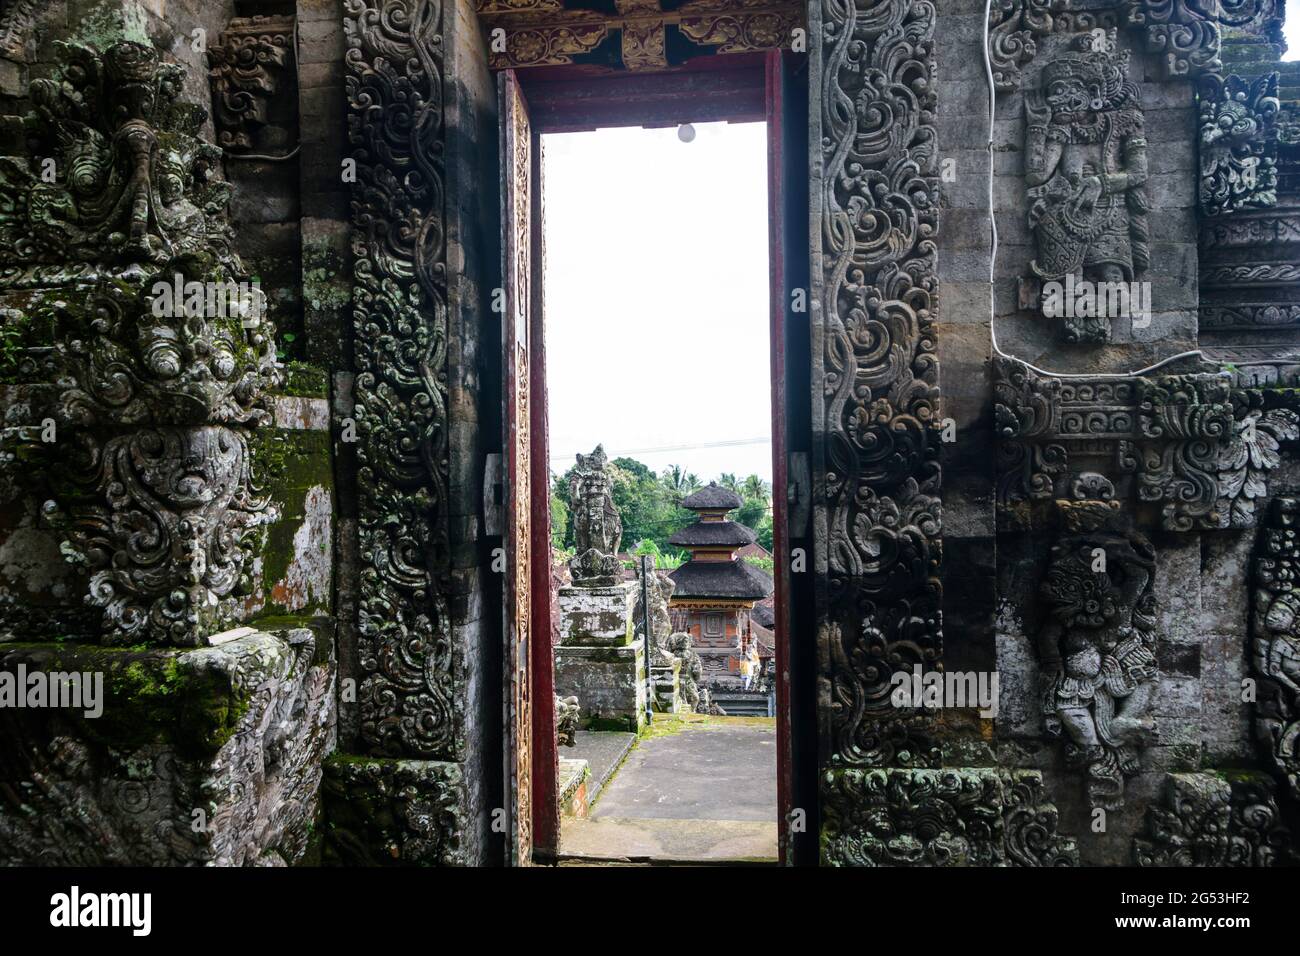 View through one of the doors of the main entrance of the Pura Kehen temple.  Cempaga, Bangli Regency, Bali, Indonesia. Stock Photo